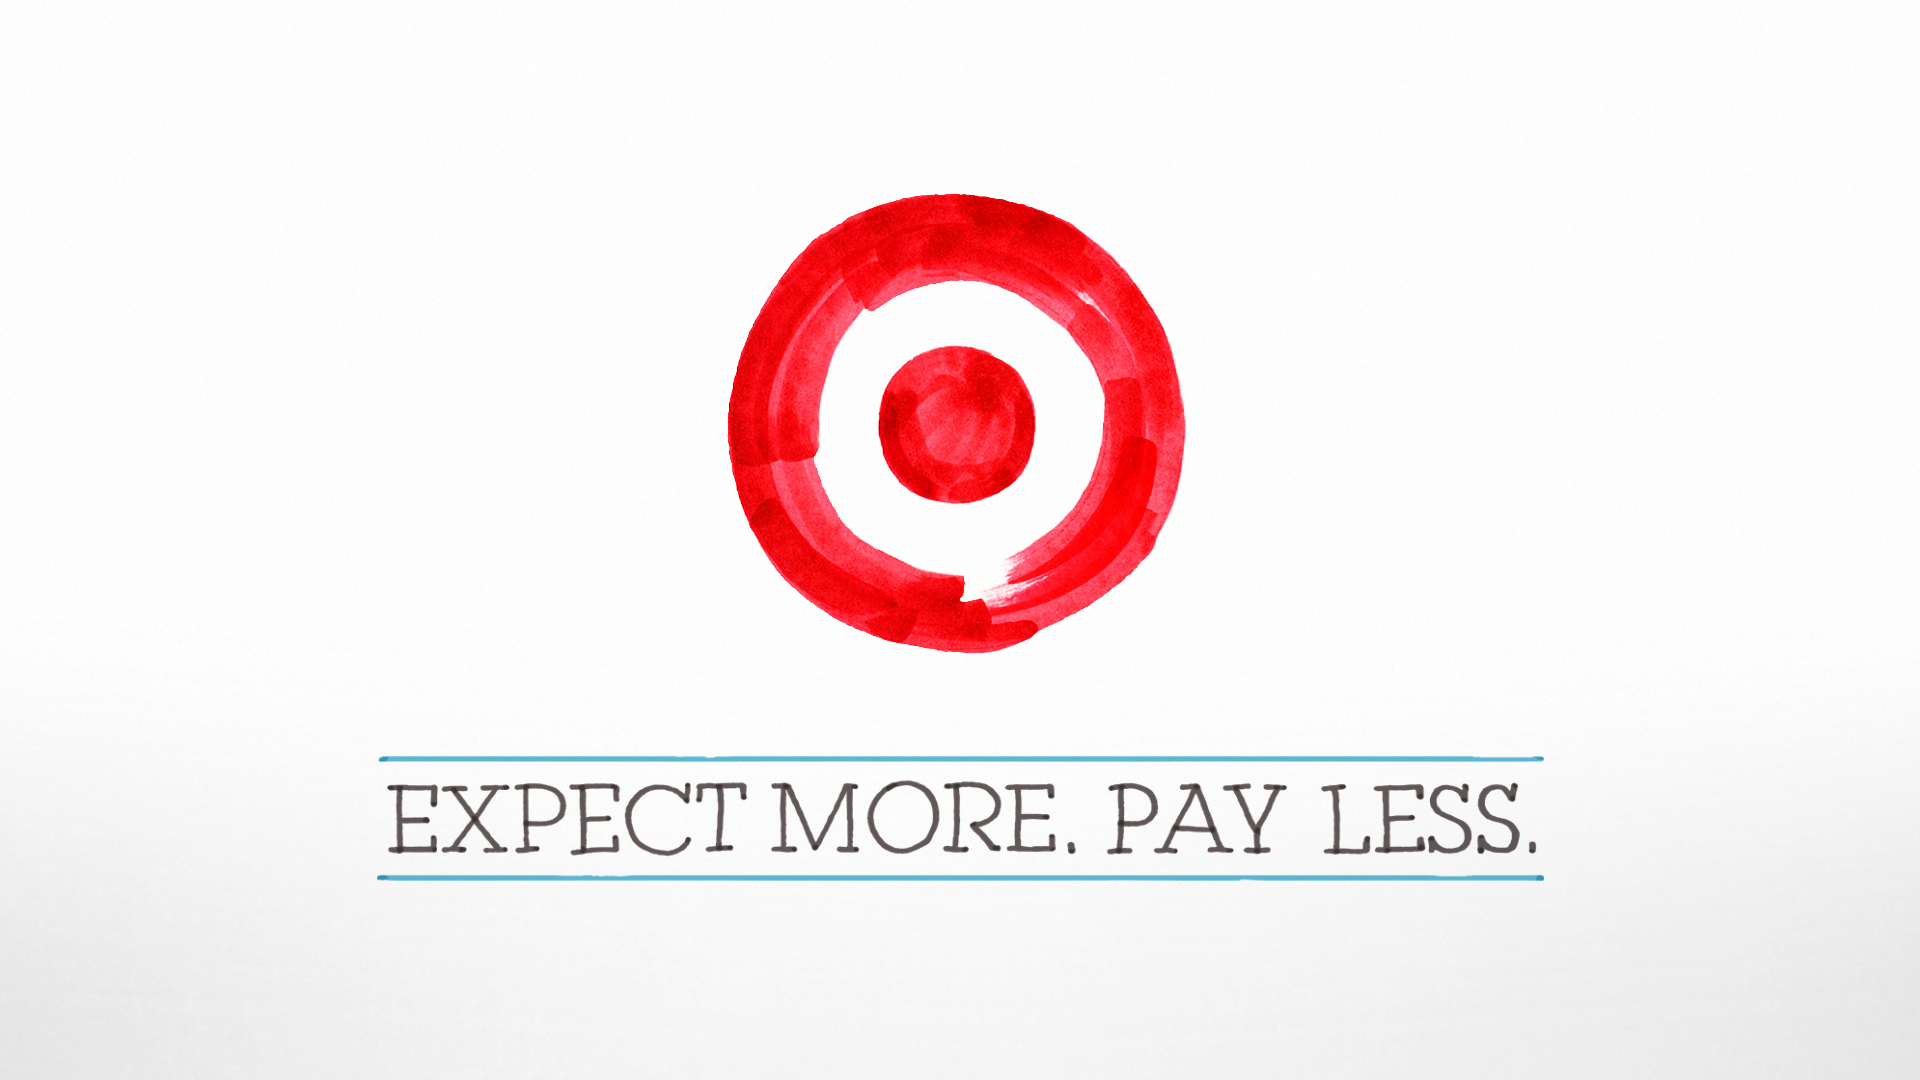 target expect more pay less